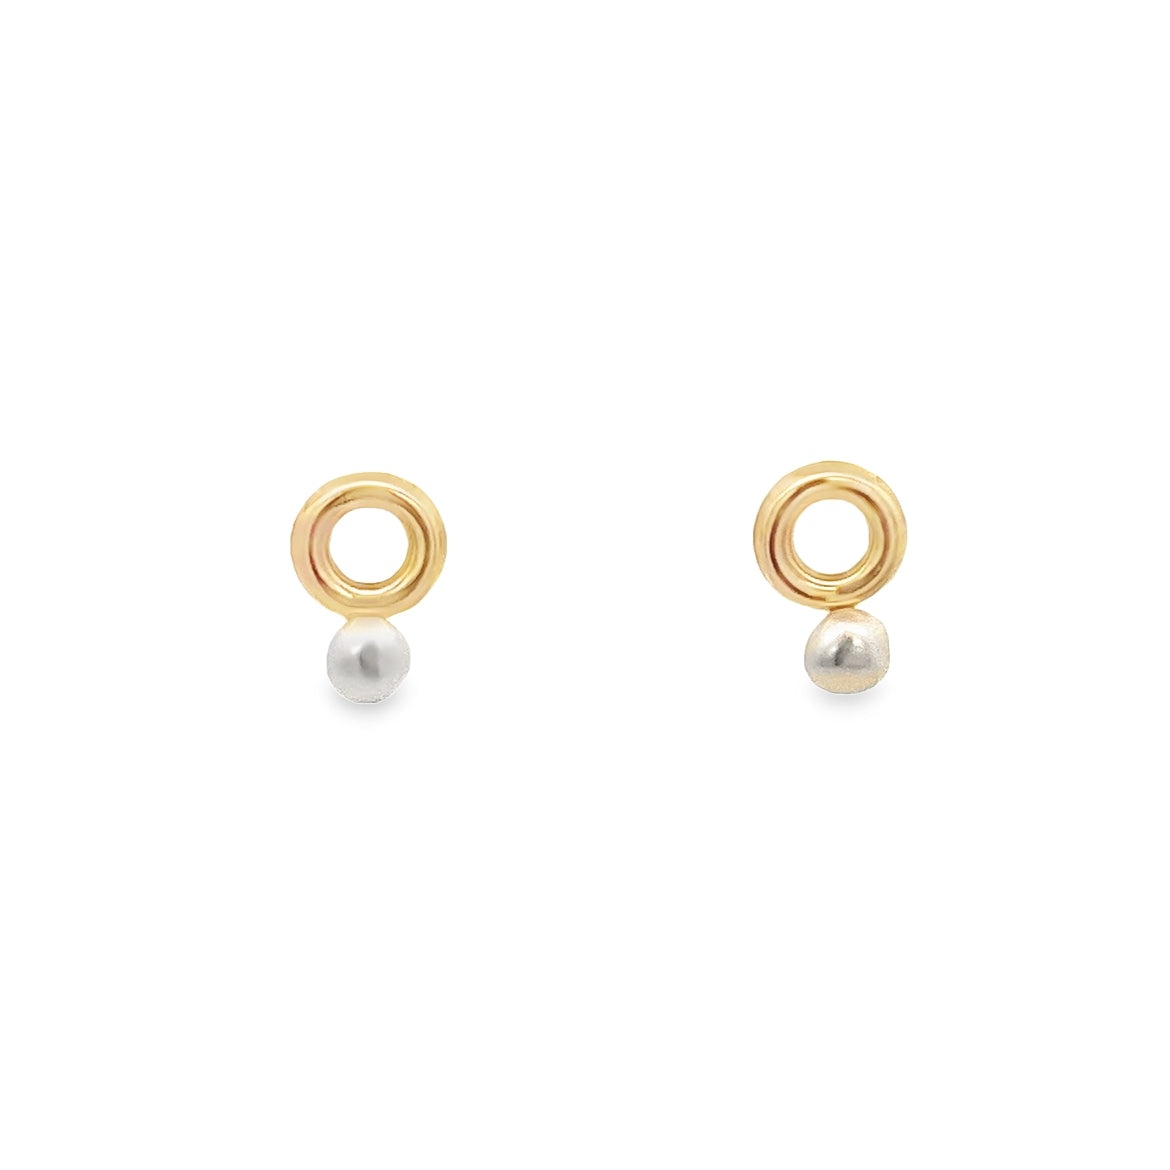 14K GOLD CIRCLE AND PEARL EARRINGS